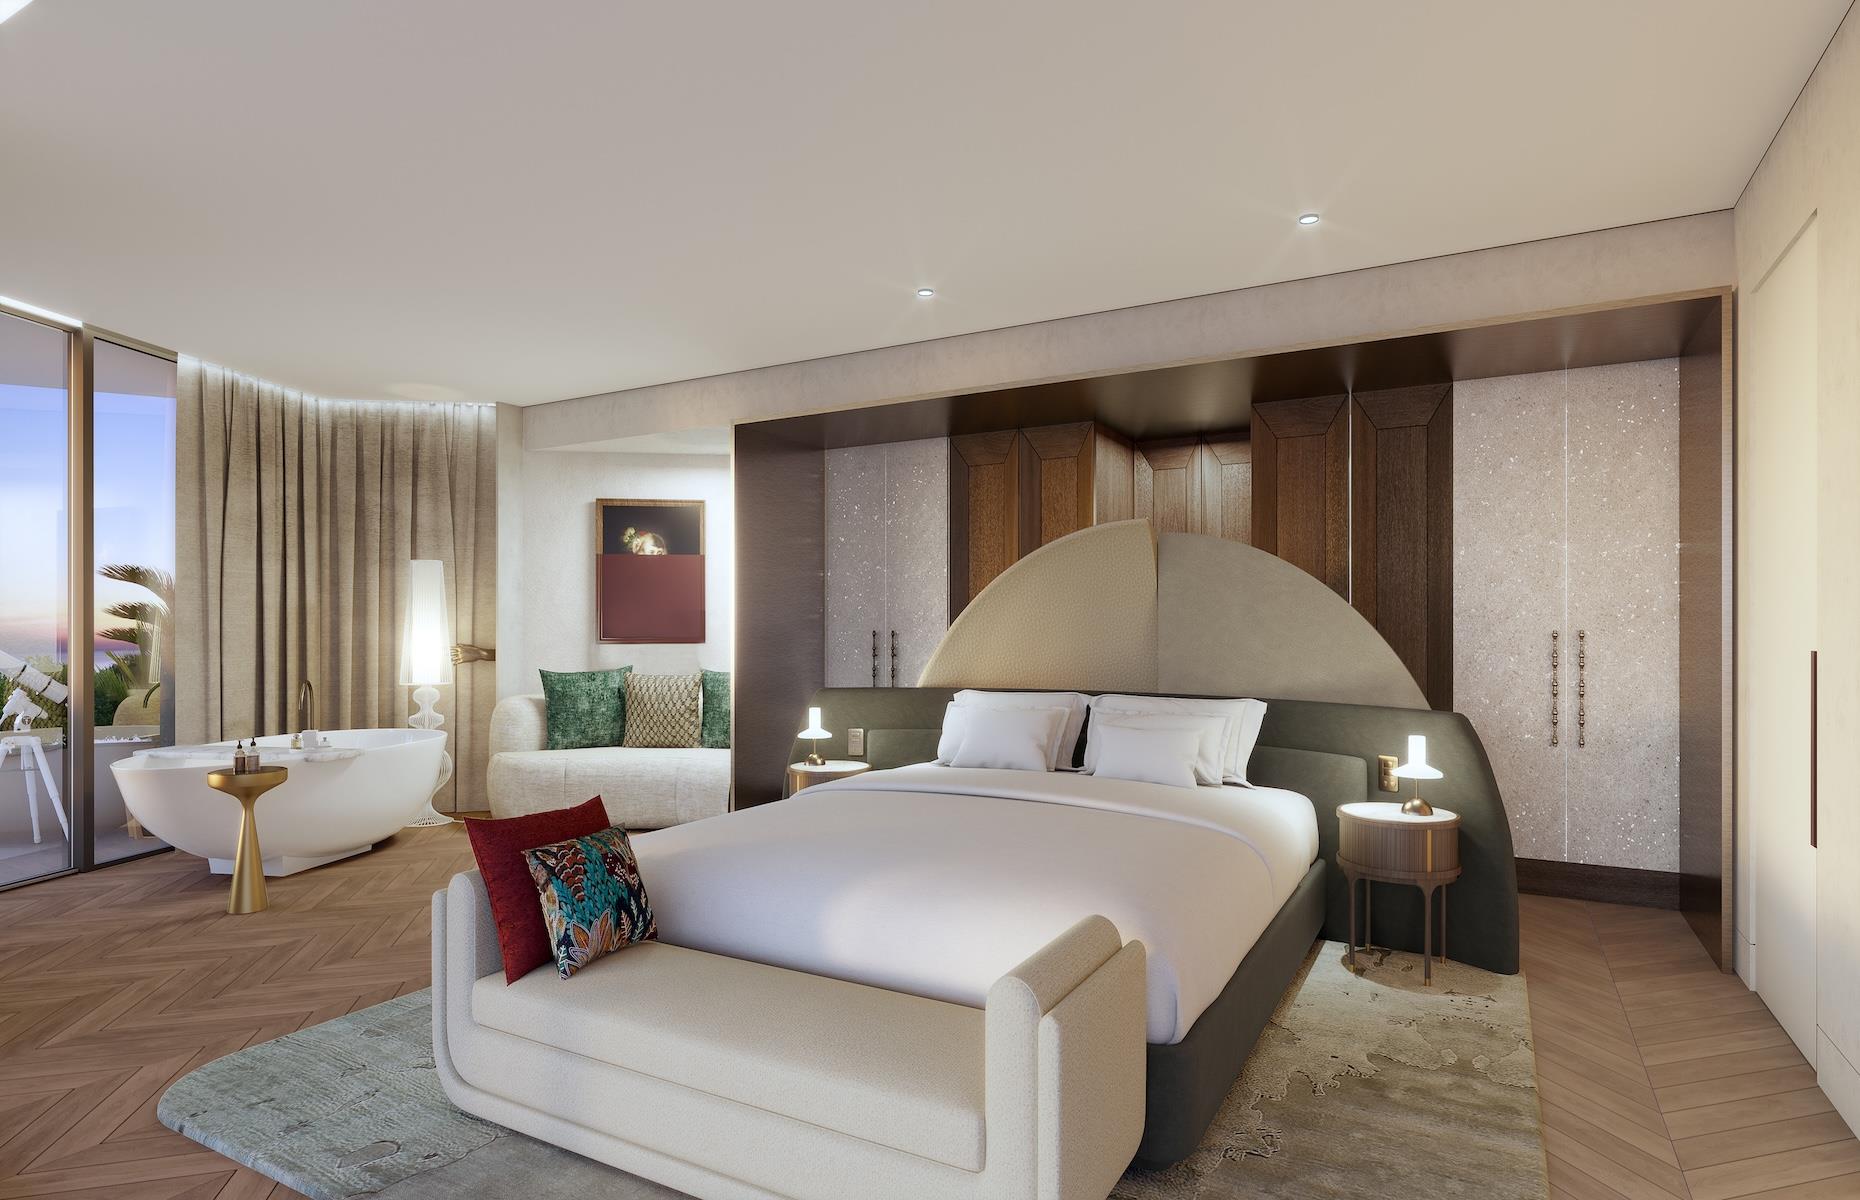 <p>It’s not surprising that hotel group Ennismore has set its sights on Barcelona’s hip 22@ district for the first European outpost of its SLS brand. Slated to open in the revitalised old industrial area of Poblenou in the second half of 2024, the striking 471-room SLS Barcelona will combine SLS’s signature cool and cheeky style with seaside Med vibes. Water views are a given as each room will have a balcony and there will be three pools and two restaurants. The large rooftop sky bar and a spa will be a high point, as will direct access to the beach.  </p>